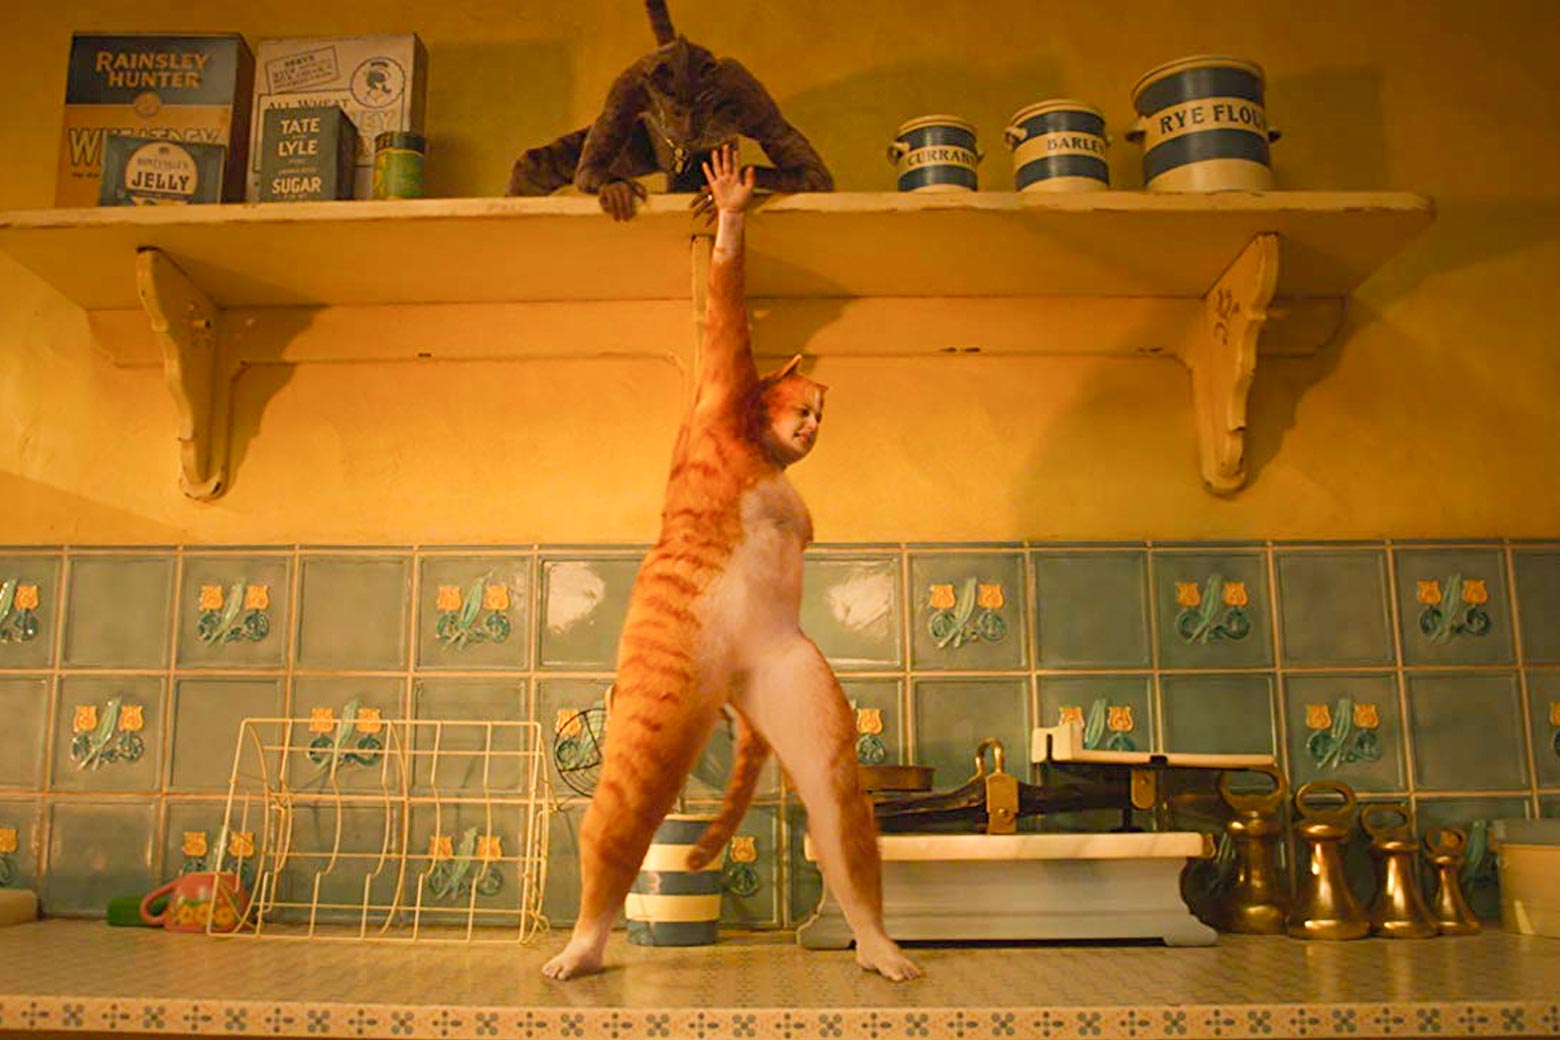 Rebel Wilson, wearing a yellow cat suit with a white belly, stands on a kitchen counter with a floral tile backsplash, one arm reaching up toward a shelf with boxes and jars.